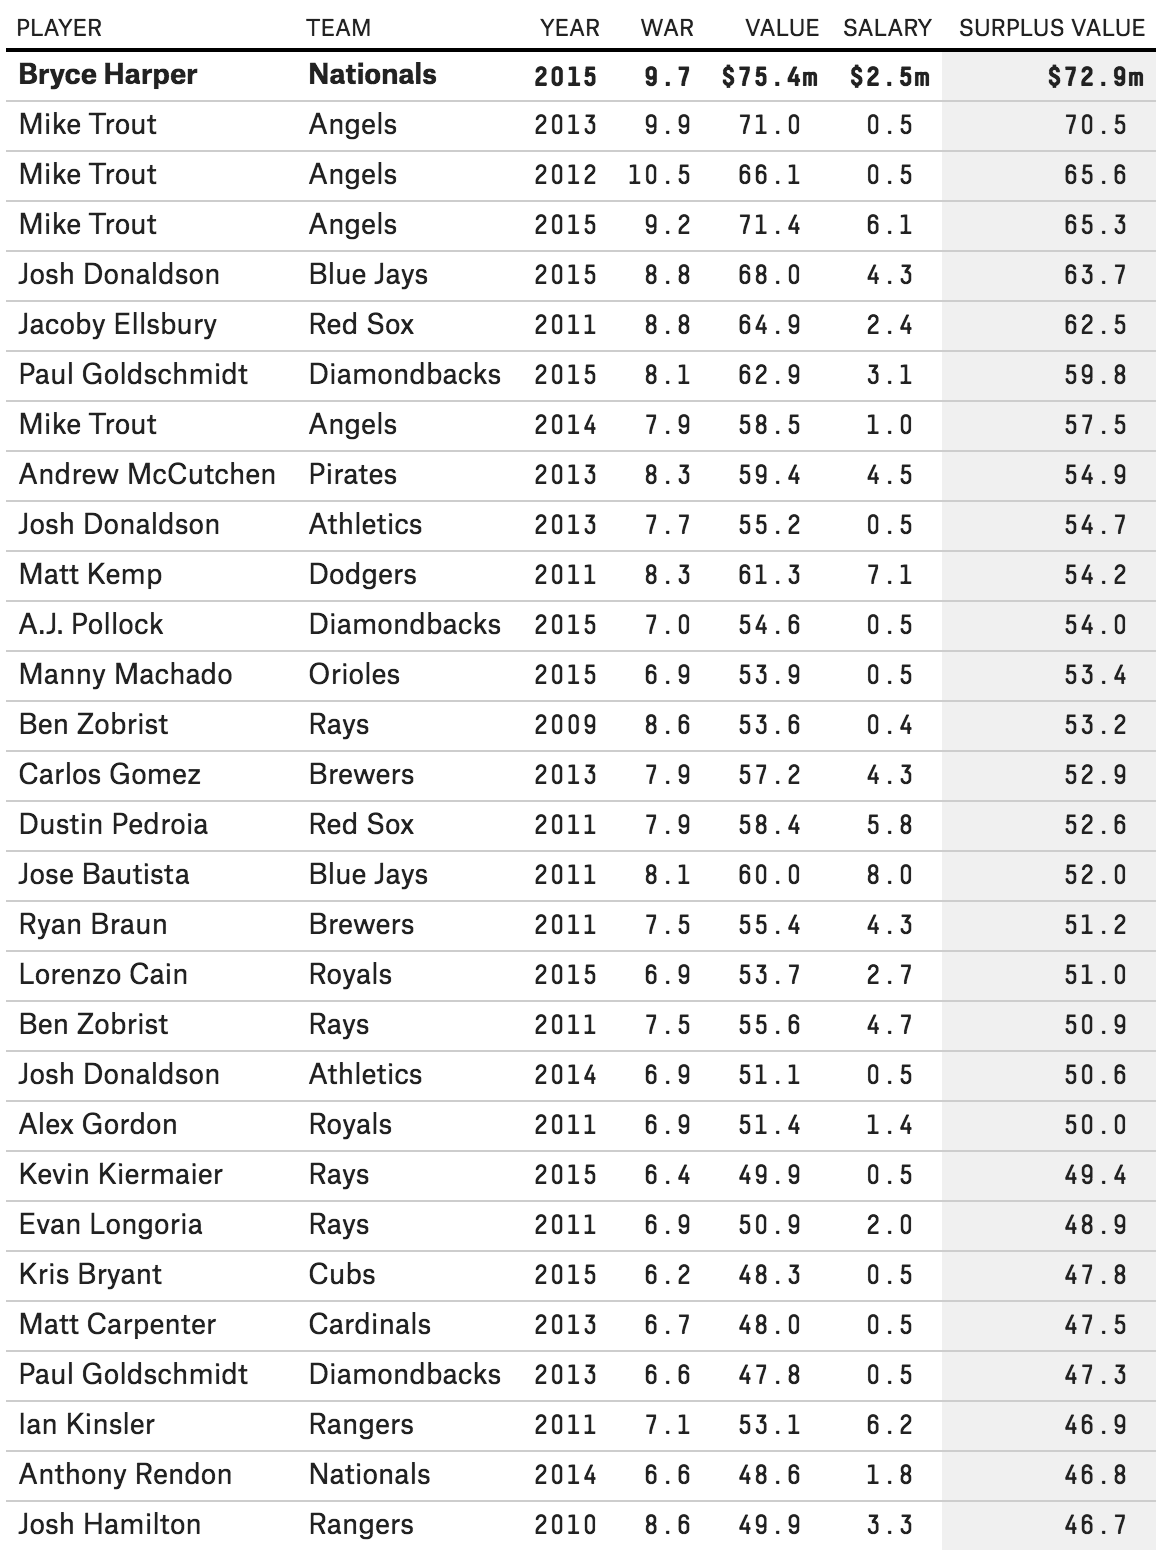 got data? Who is the most valued MLB player based on the WAR value?